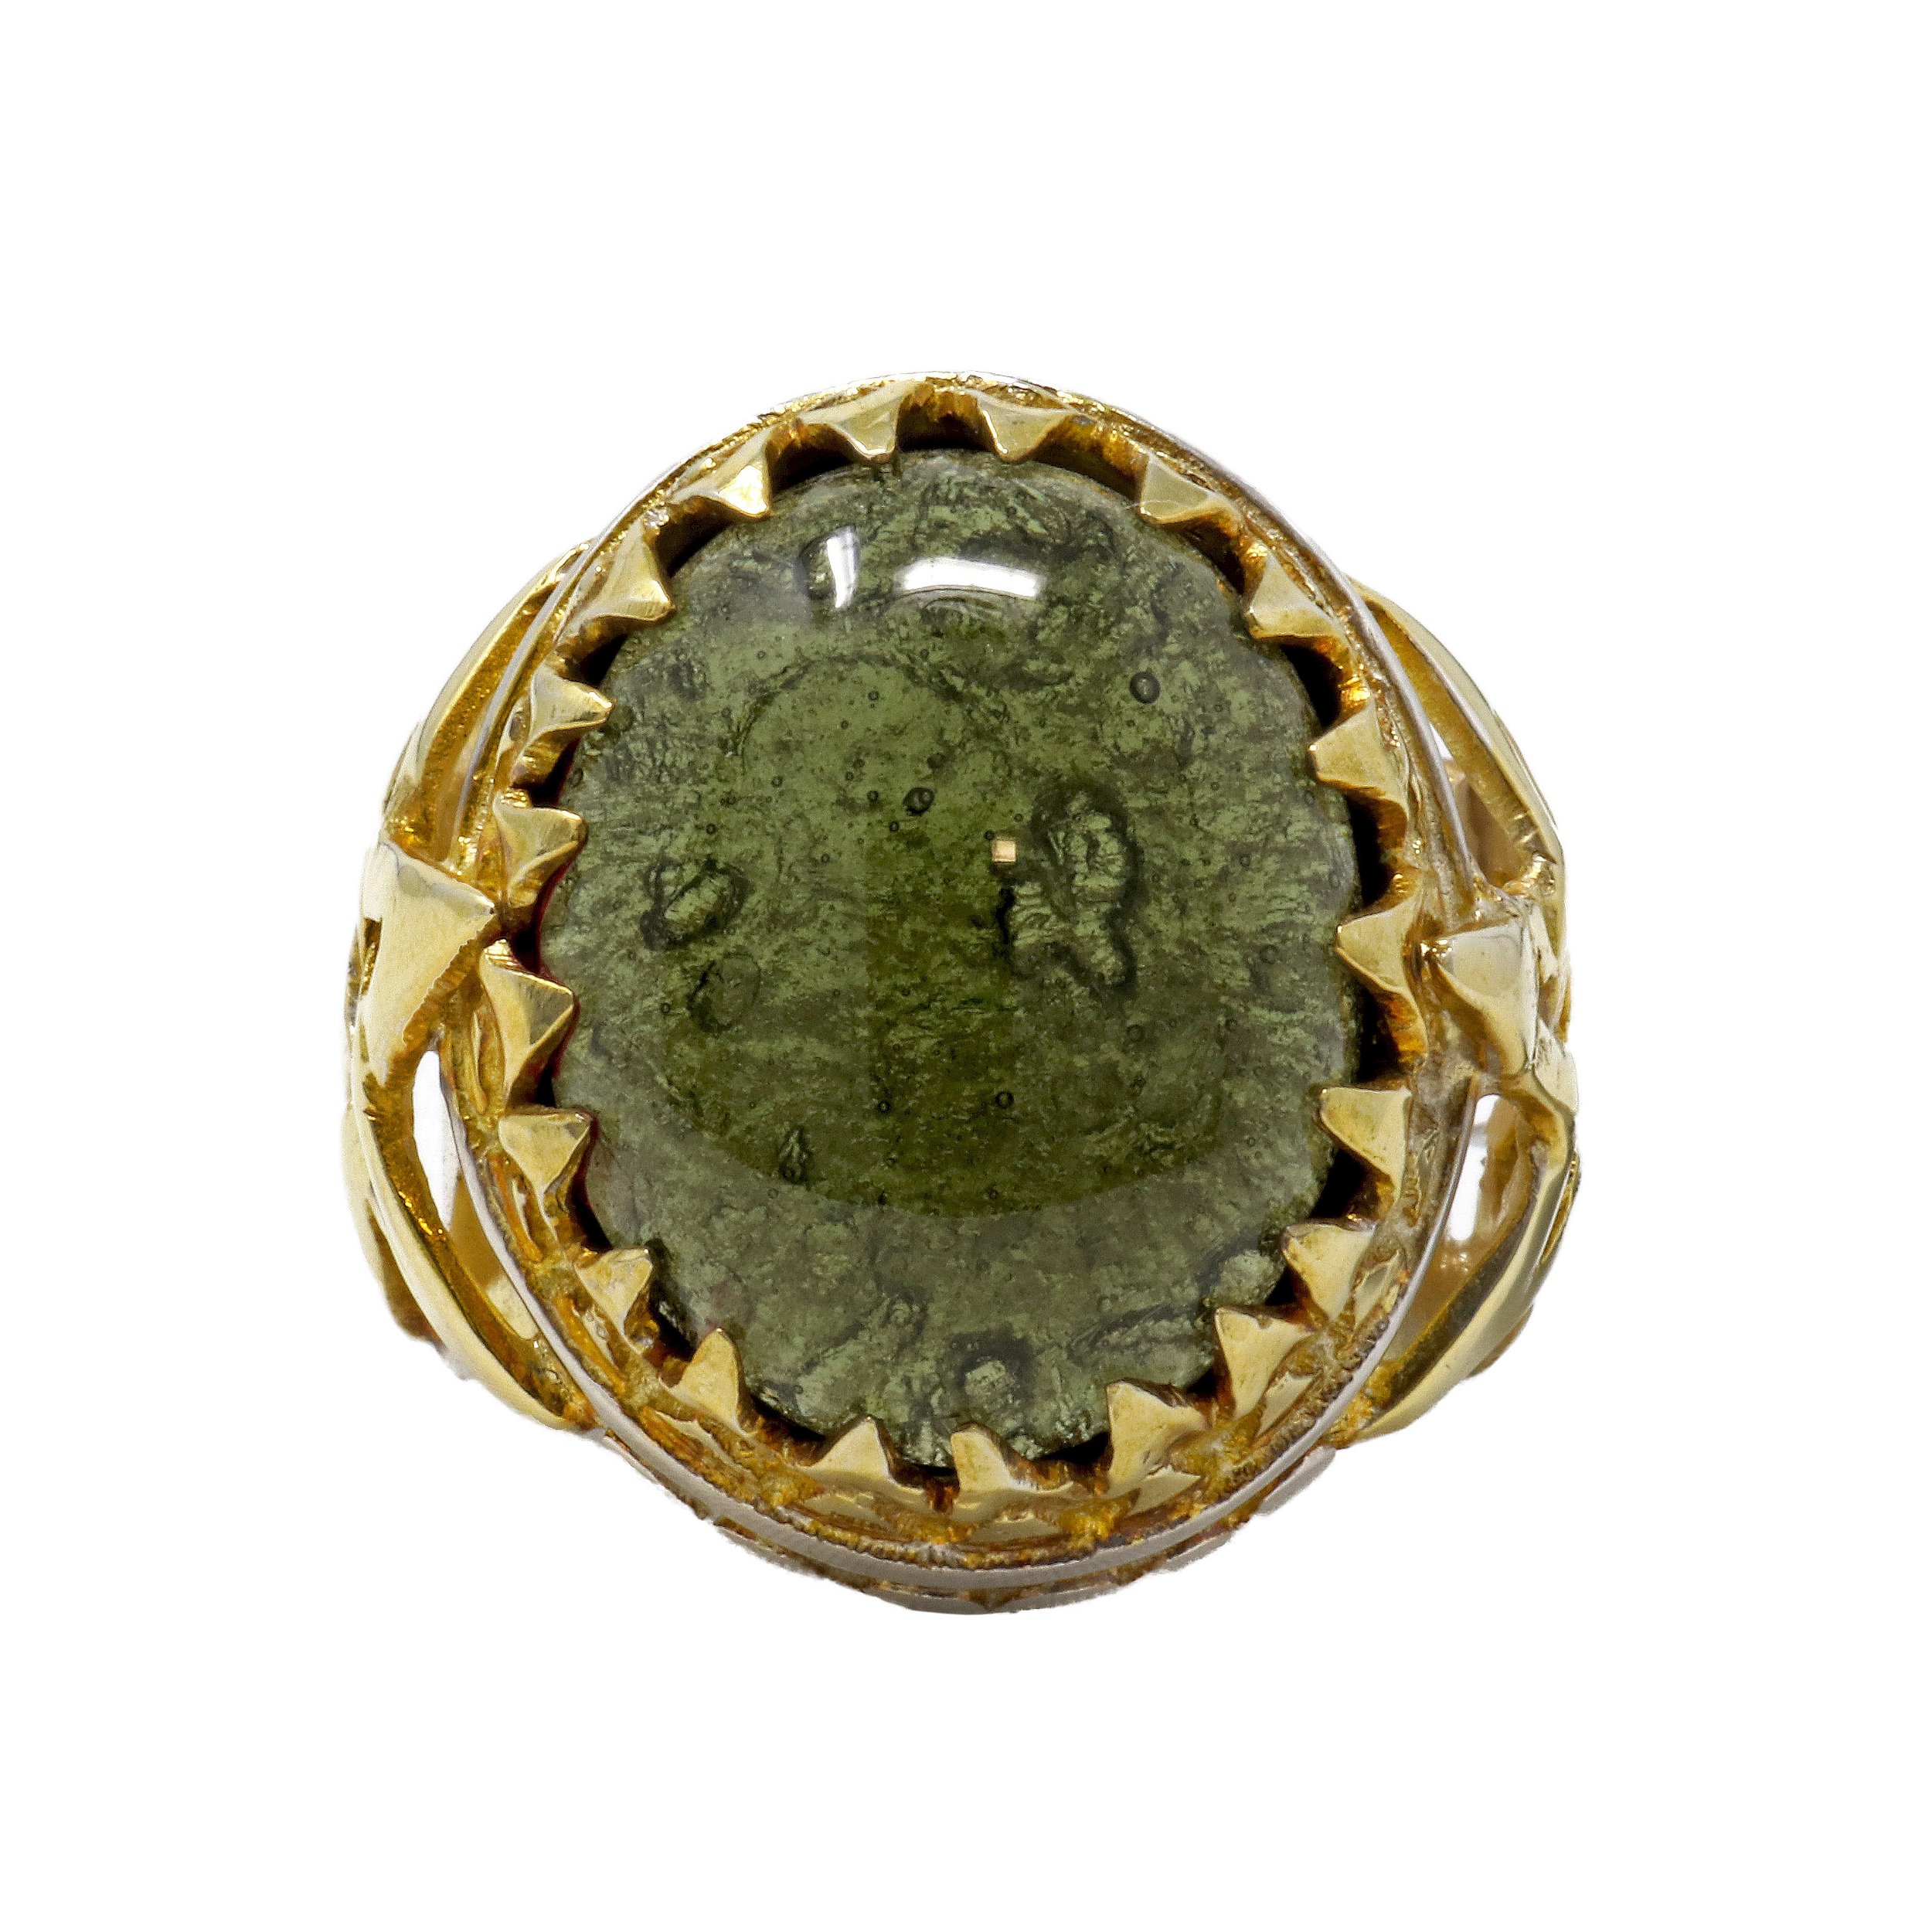 Moldavite Ring Size 9 -Cabochon In Star Band With 22k Overlay